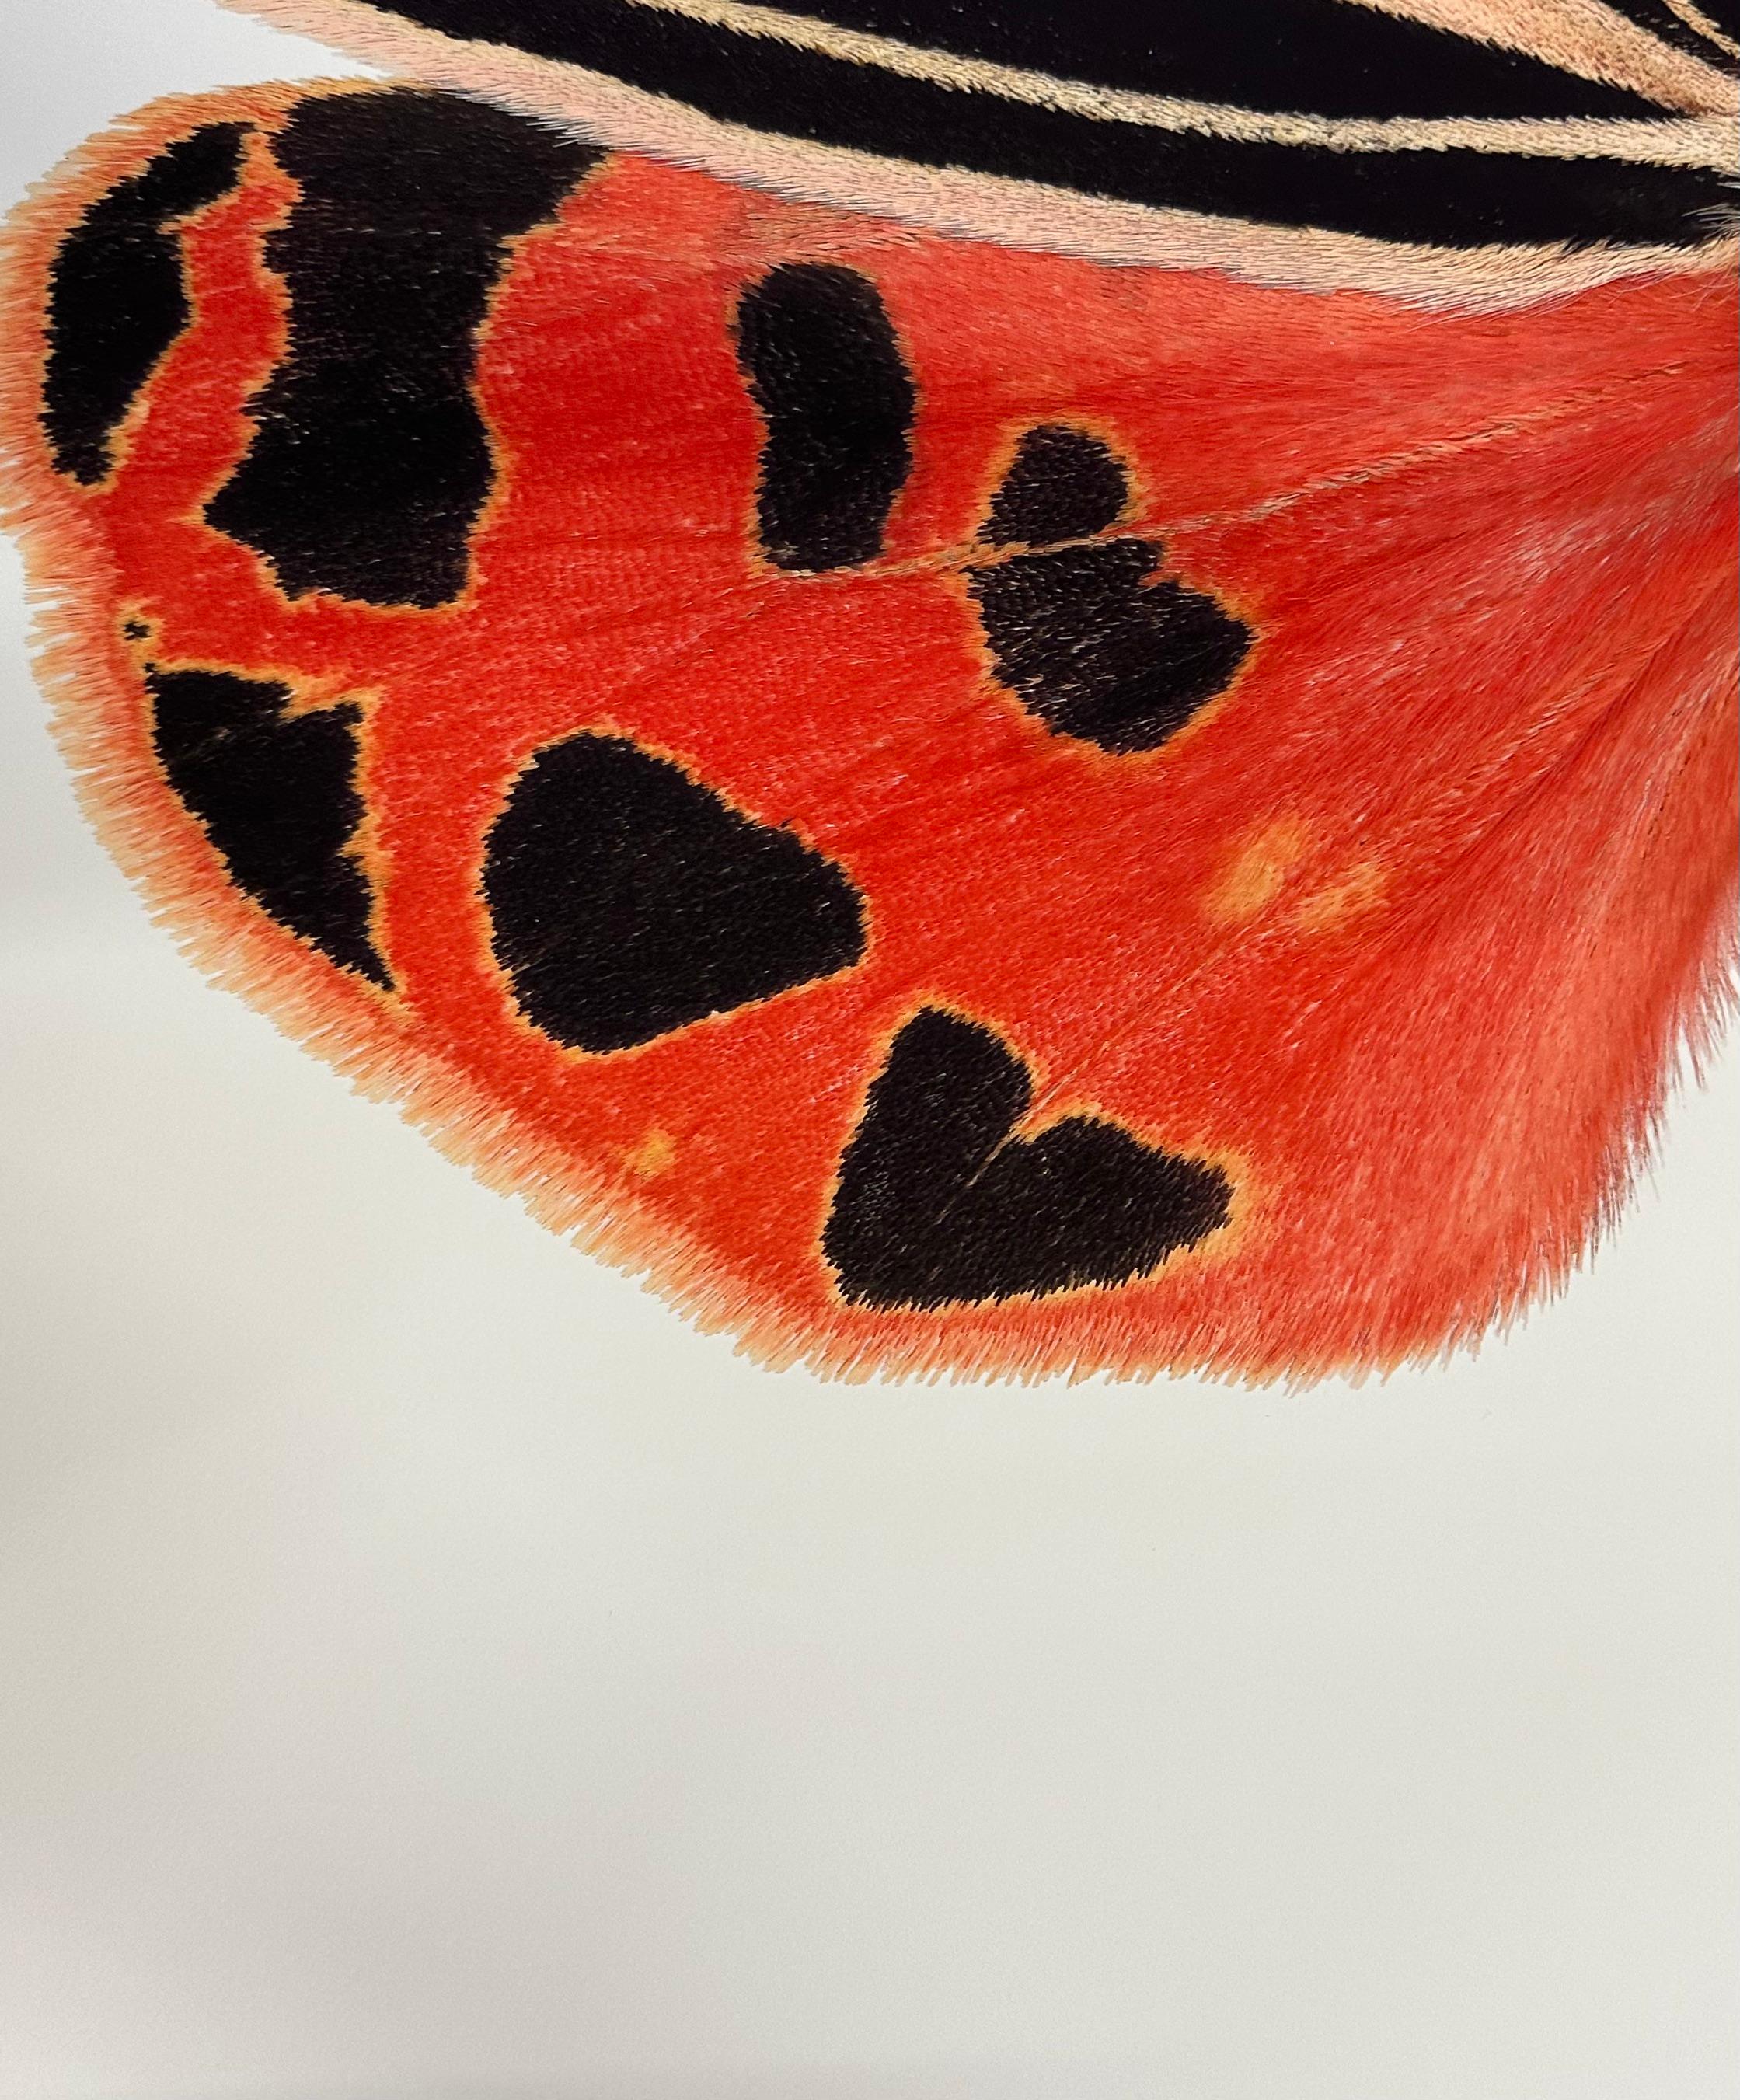 Grammia Virgo Female, Coral Red, Black Peach Moth Insect Wings Nature Photograph For Sale 5